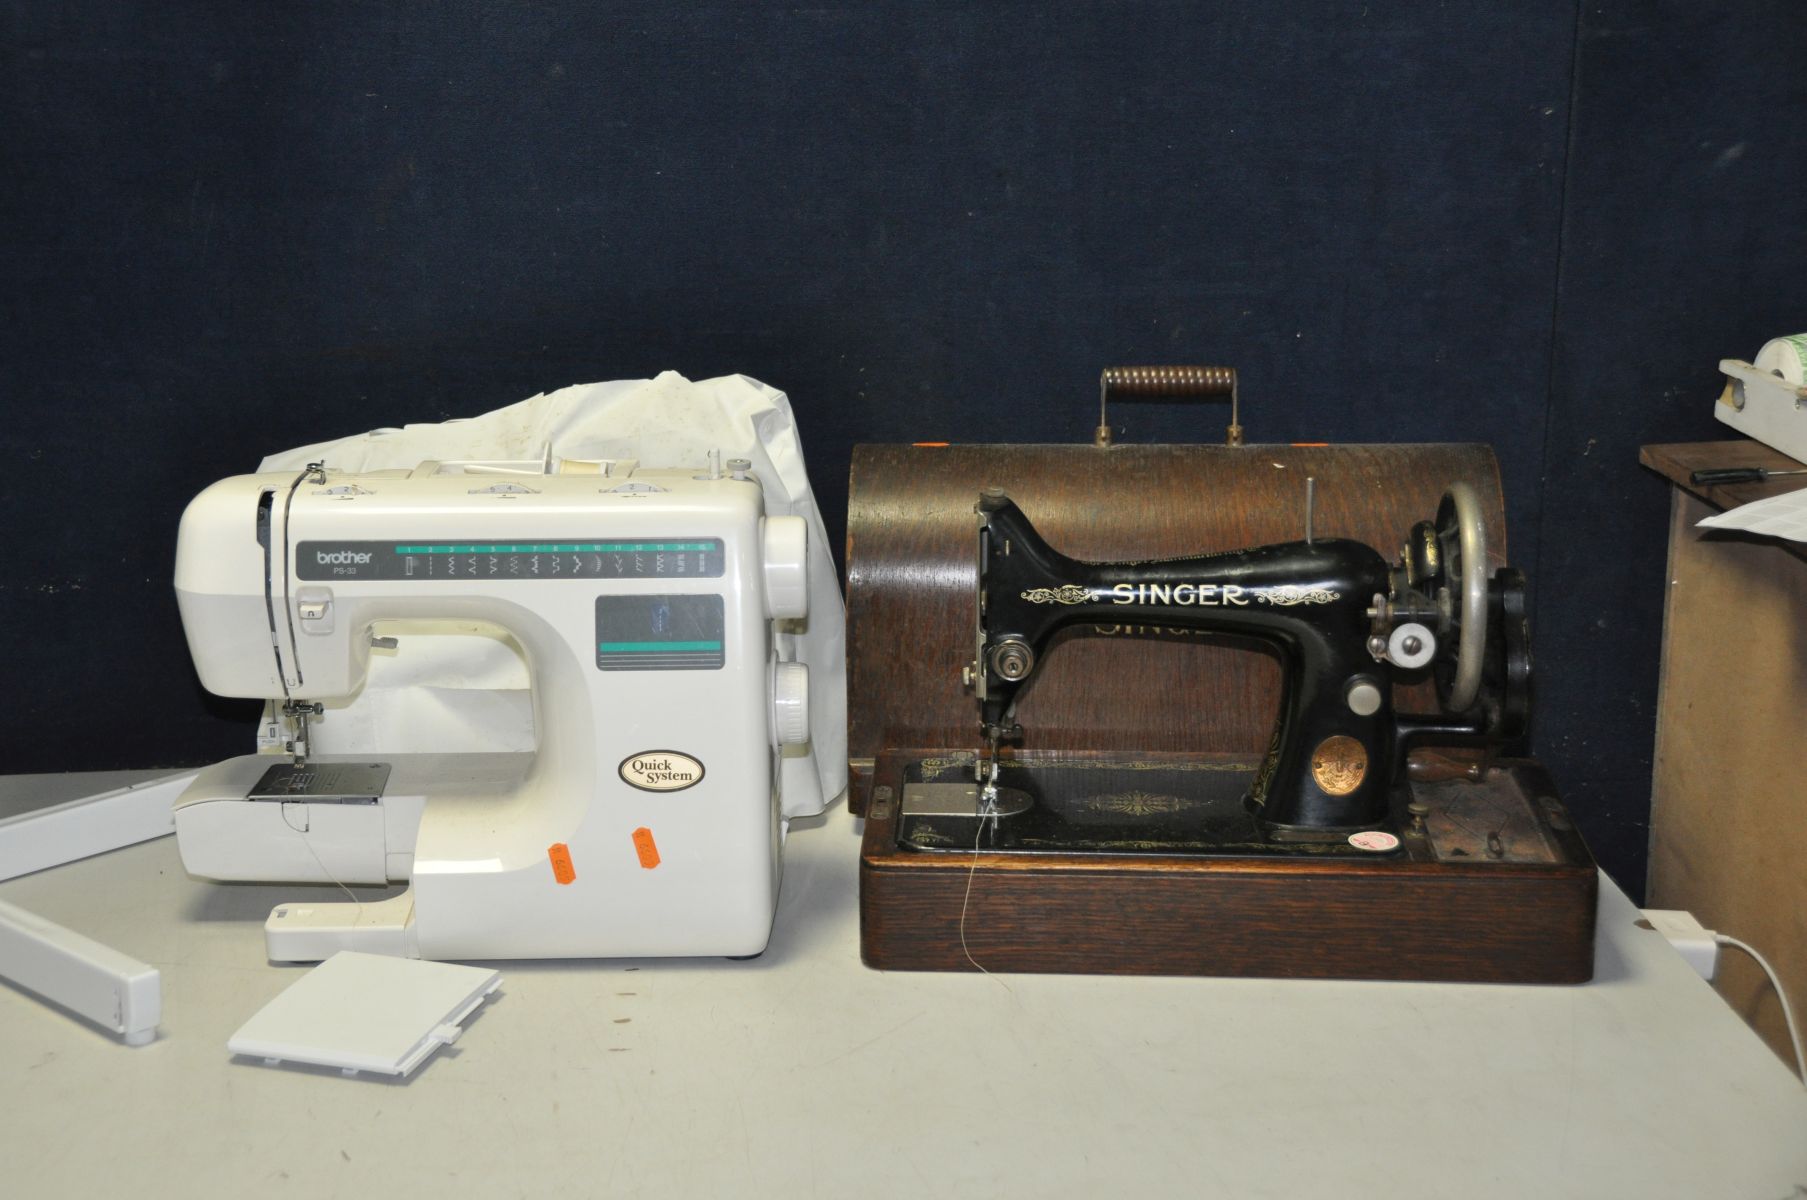 A BROTHER PS33 SEWING MACHINE (no treadle or power cable so untested), a Status pedestal fan (PAT - Image 2 of 3